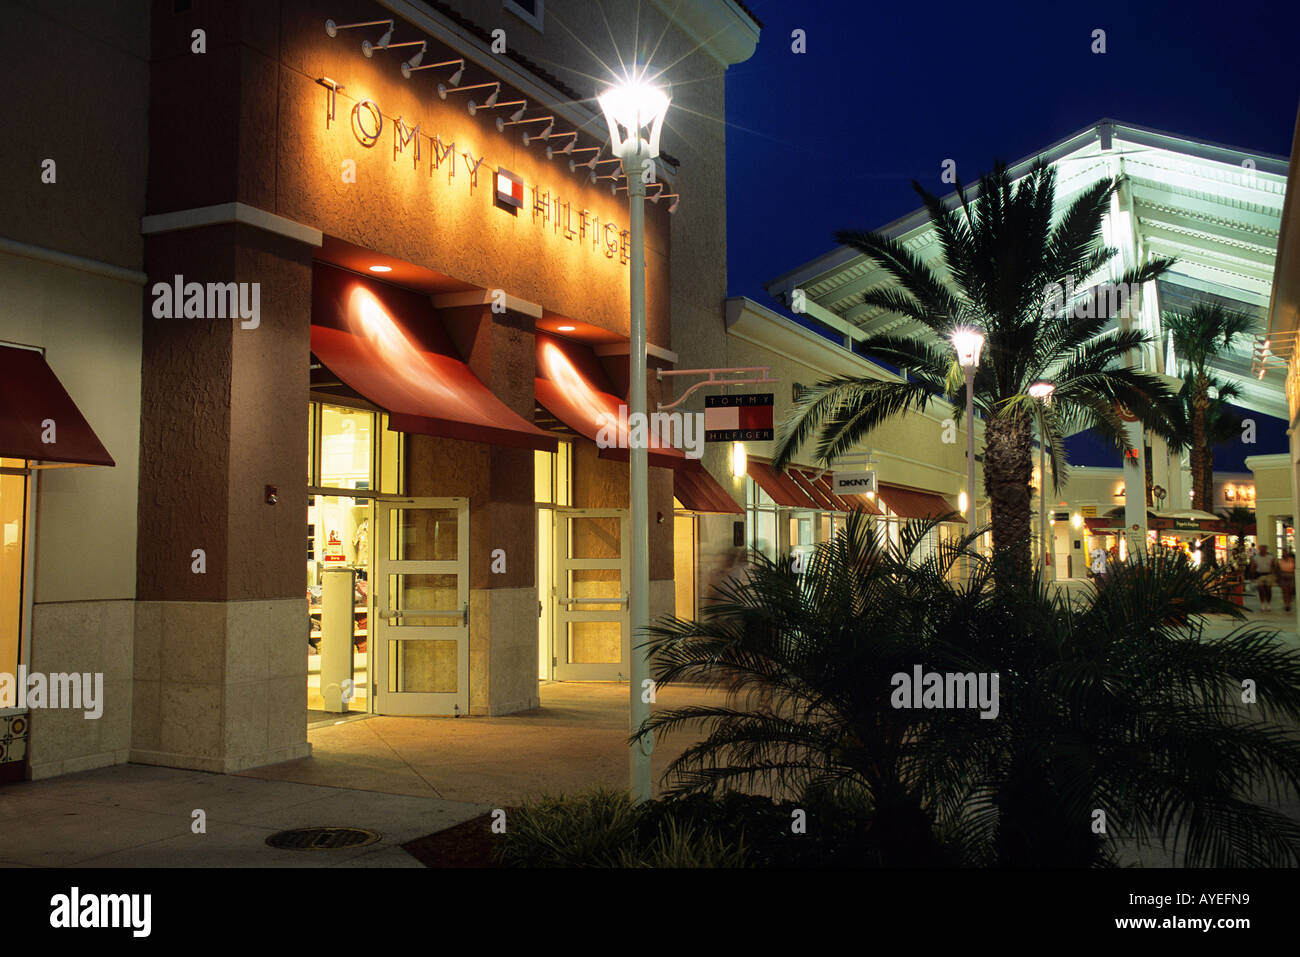 tommy premium outlets